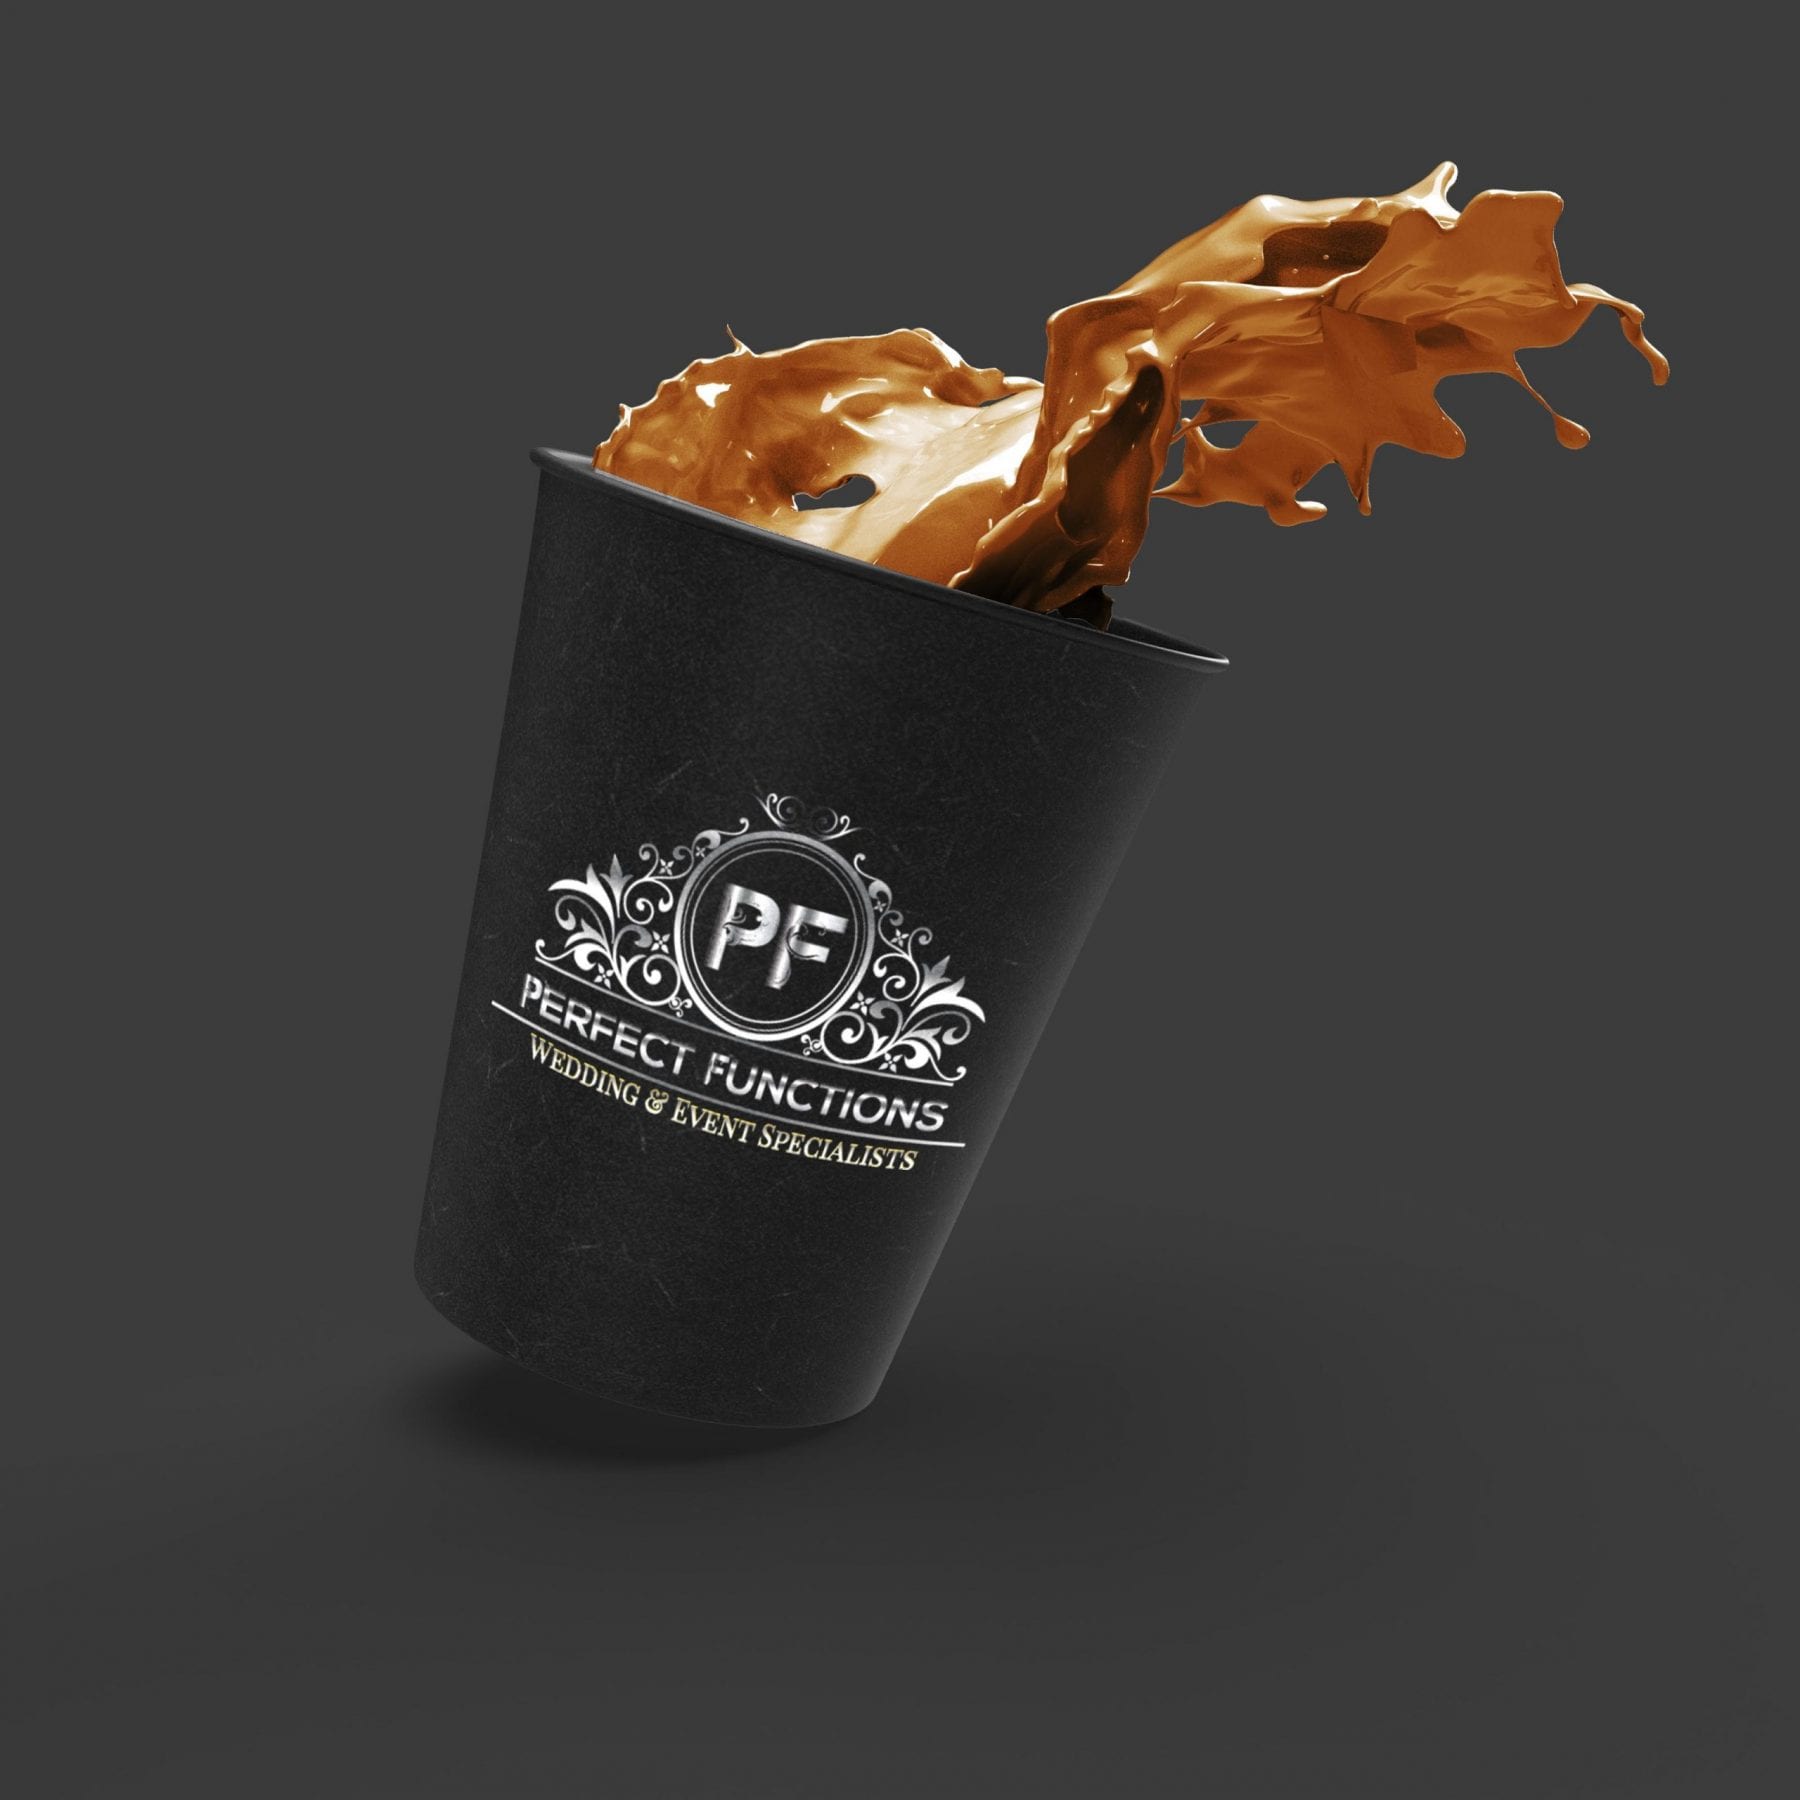 3D Rendering Realistic Coffee Cup Mockup by Mediamaks for PERFECT FUNCTIONS